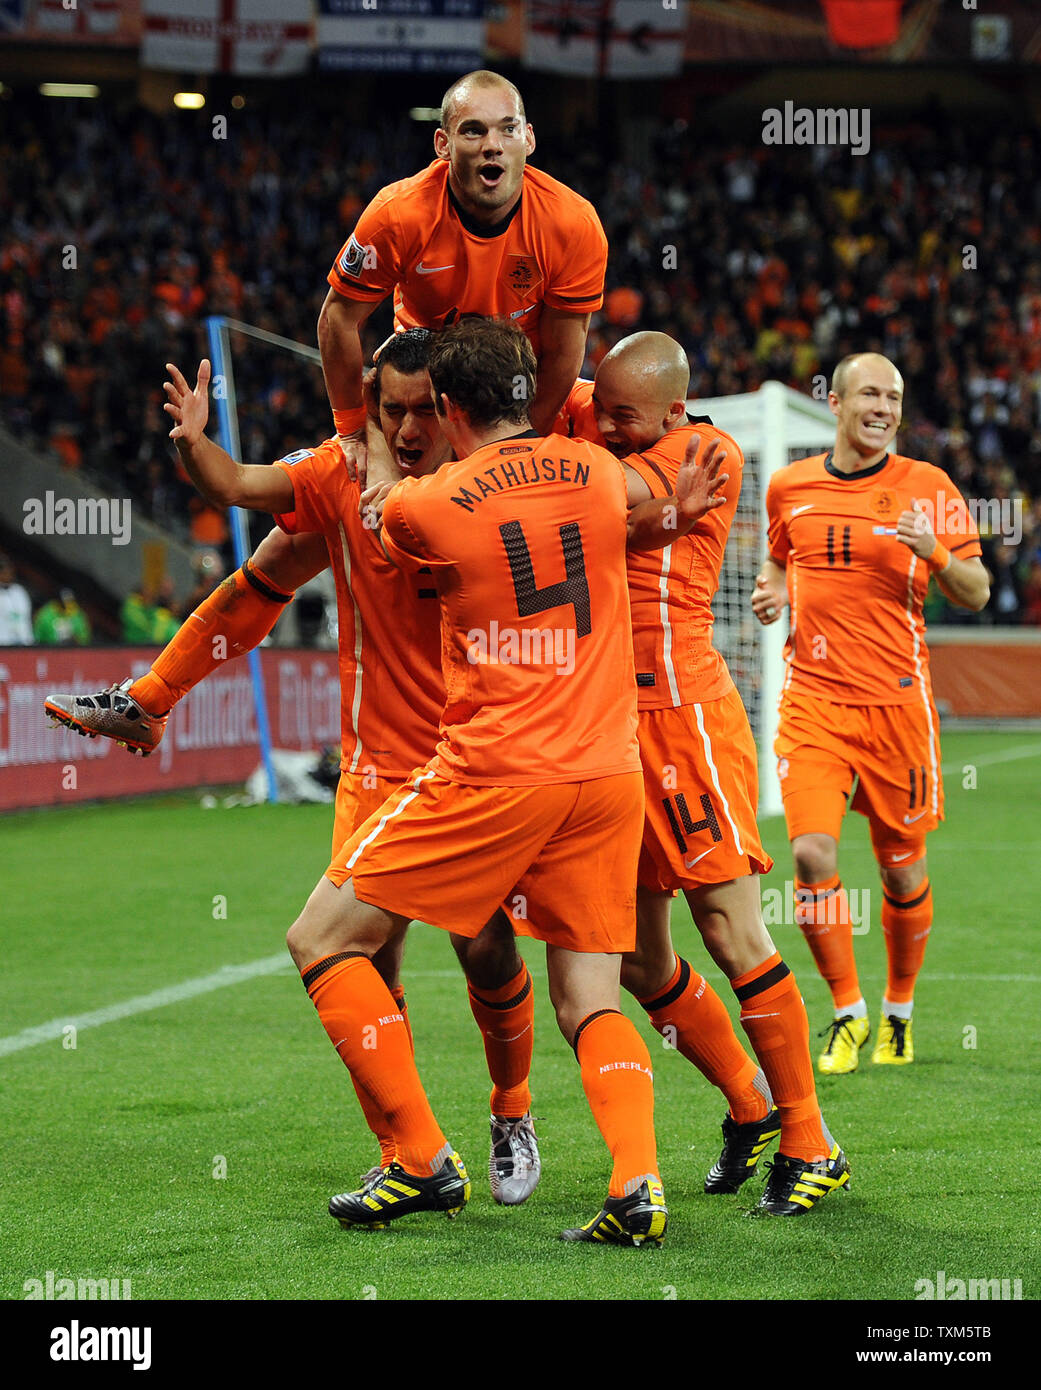 Giovanni Van Bronckhorst of Holland is mobbed by his team-mates after scoring the opening goal during the FIFA World Cup Semi Final match at the Green Point Stadium in Cape Town, South Africa on July 6, 2010. UPI/Chris Brunskill Stock Photo